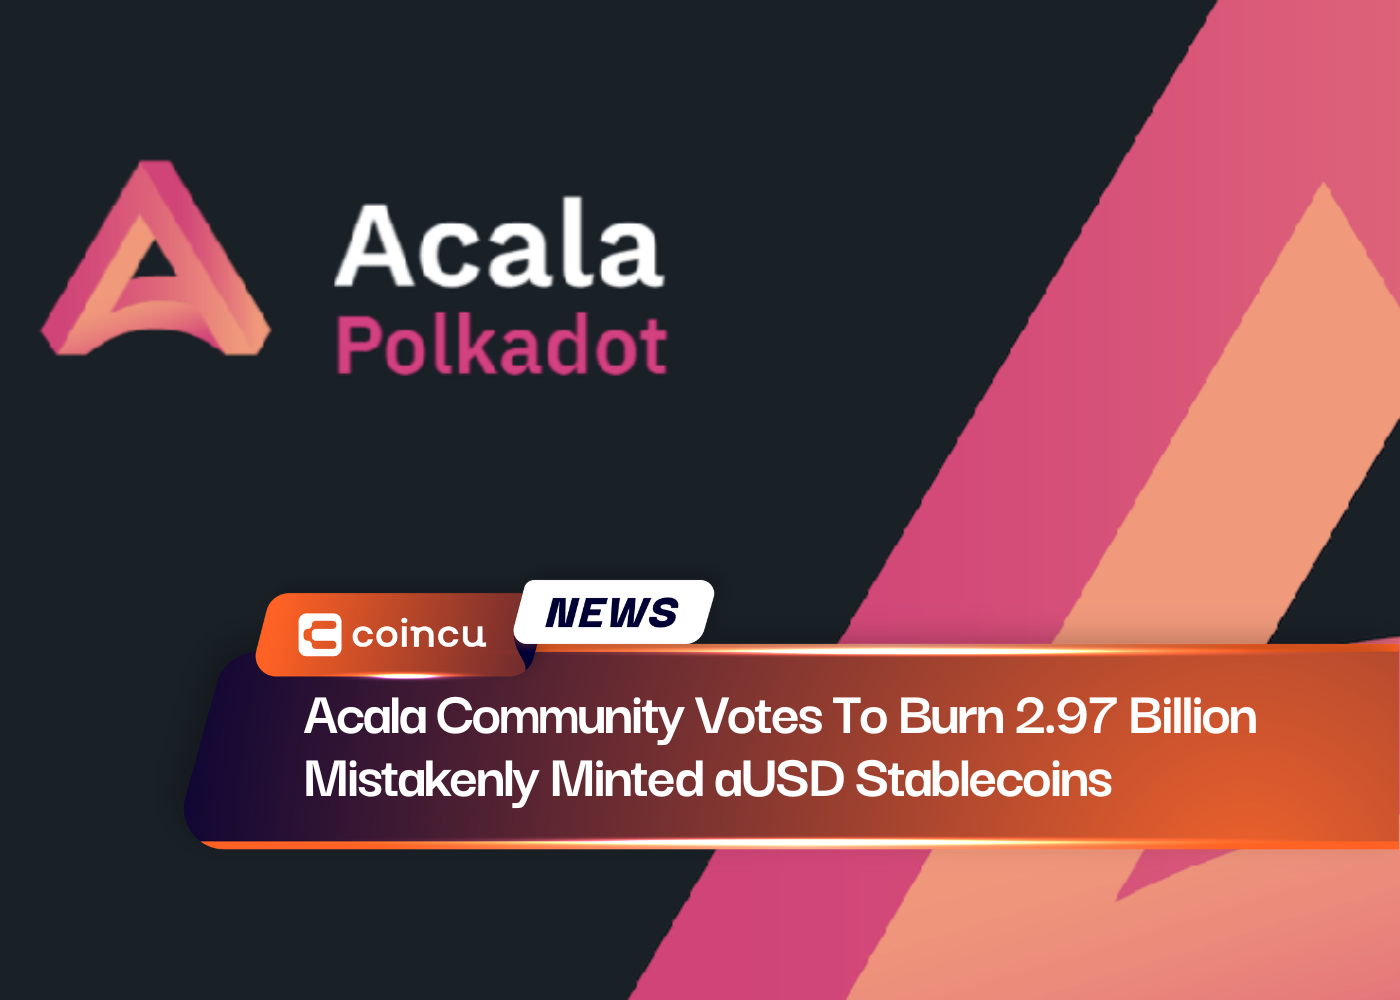 Acala Community Votes To Burn 2.97 Billion Mistakenly Minted aUSD Stablecoins